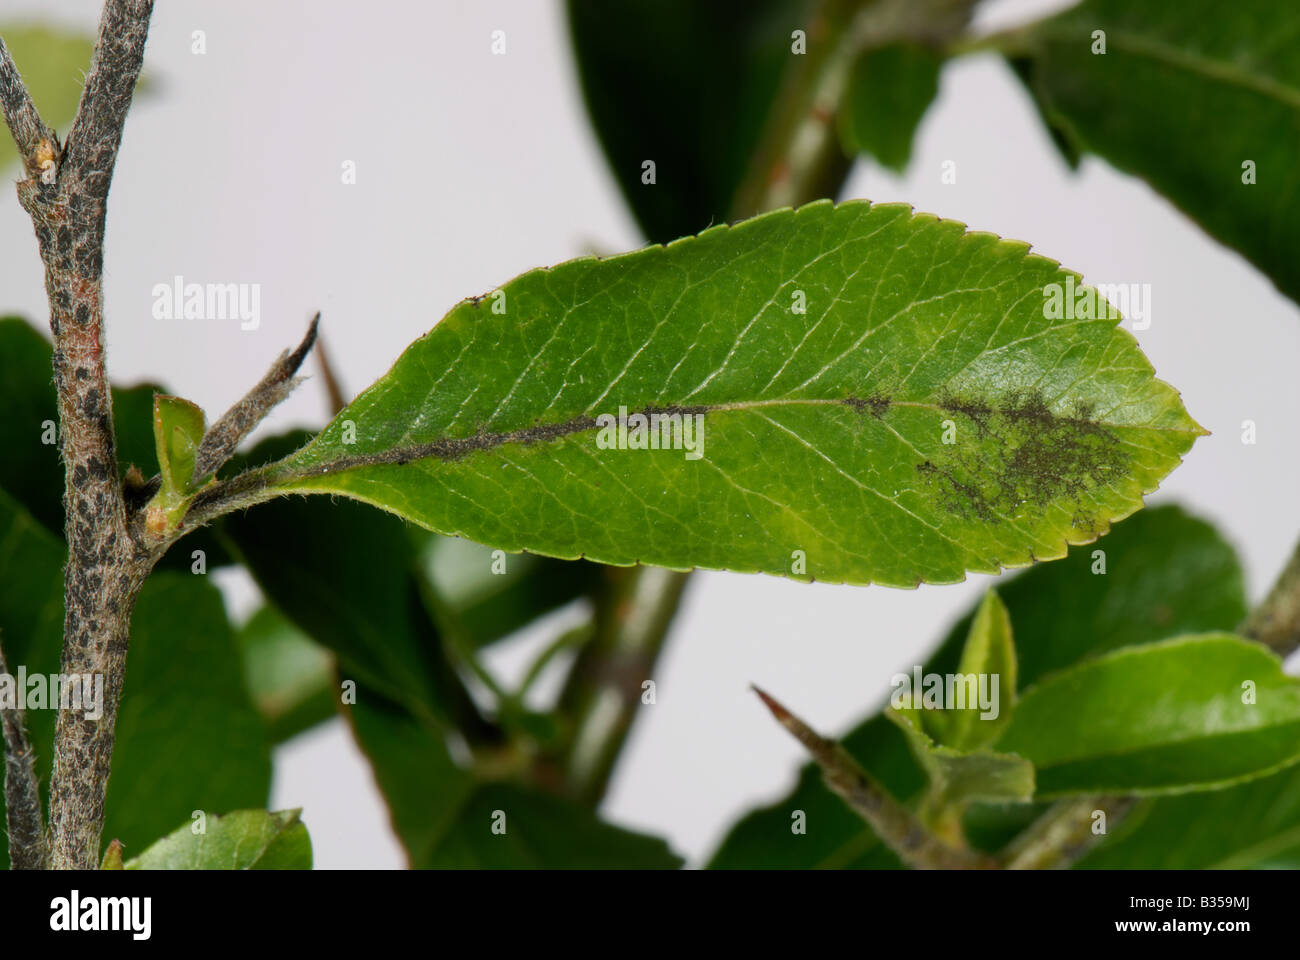 Scab Venturia inaequalis development of disease on the stem upper surface of a Pyracantha leaf Stock Photo